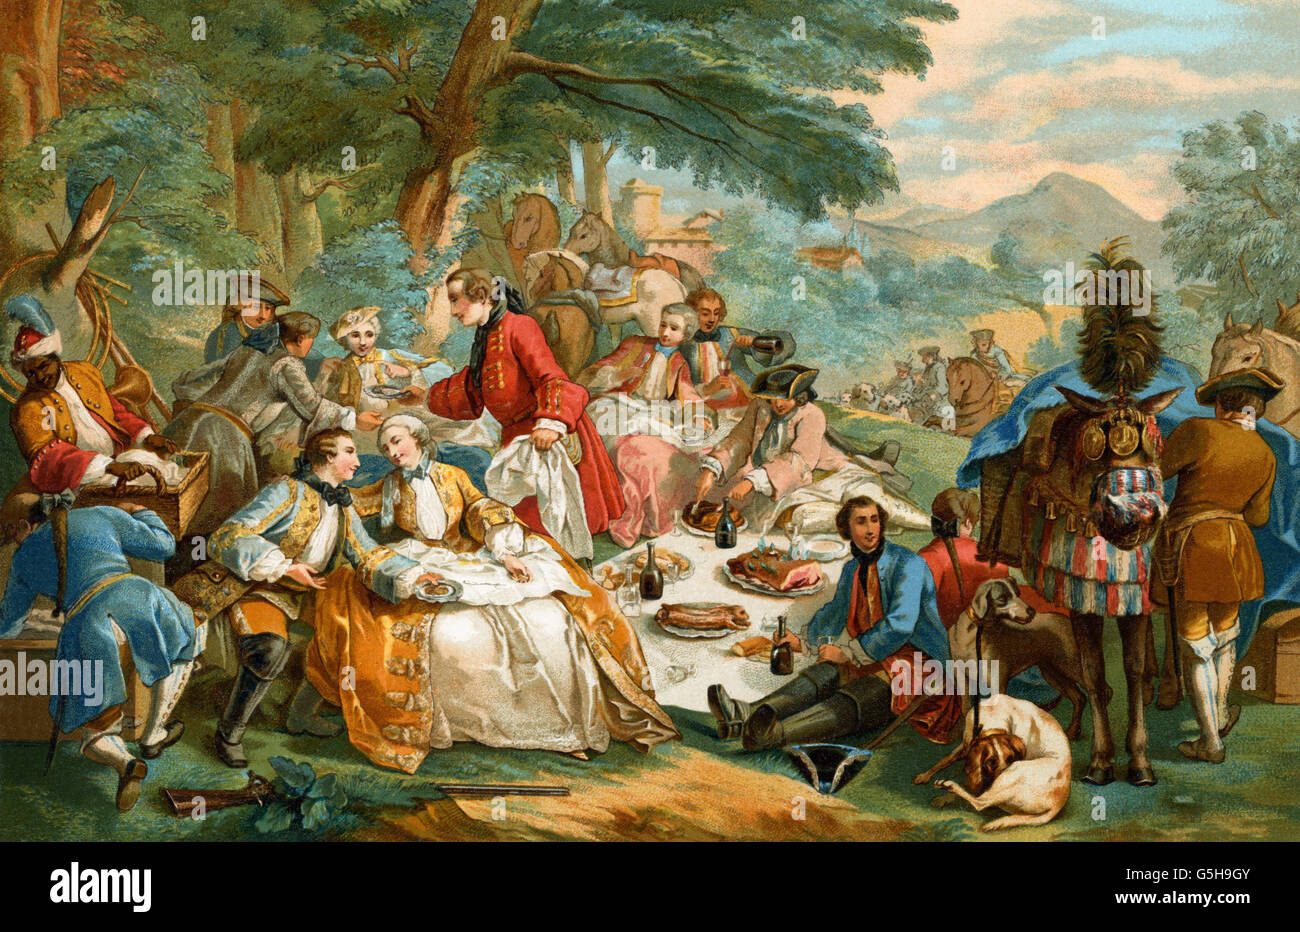 gastronomy,picnic,hunters' breakfast,France,18th century,coloured lithograph,19th century,18th century,graphic,graphics,France,hunt,hunts,resting,rest,having breakfast,have breakfast,half length,hunter,hunters,sitting,sit,standing,companionship,companionships,plate,plates,ham,eating,eat,wine bottle,wine bottles,drinking,drink,servant,servants,manservant,menservants,serve,serving,dog,dogs,horse,horses,dish,dishes,meal,meals,table cloth,tablecloth,table cloths,tablecloths,coloured,colored,historic,historical,,Additional-Rights-Clearences-Not Available Stock Photo